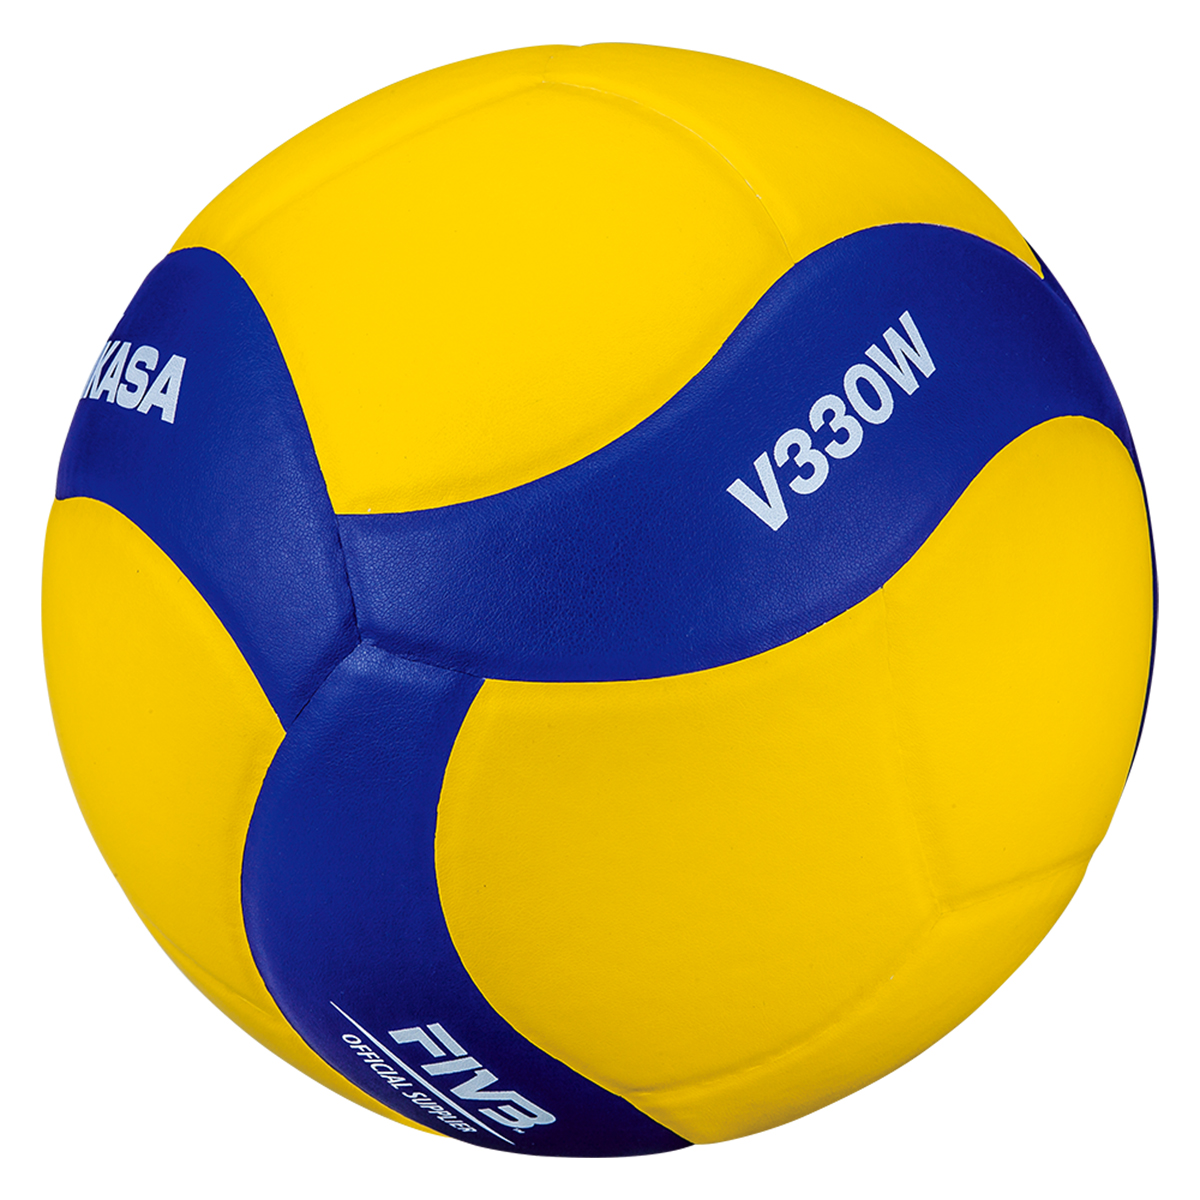 MIKASA V330W VW SERIES VOLLEYBALL 18 PANEL SIZE 5